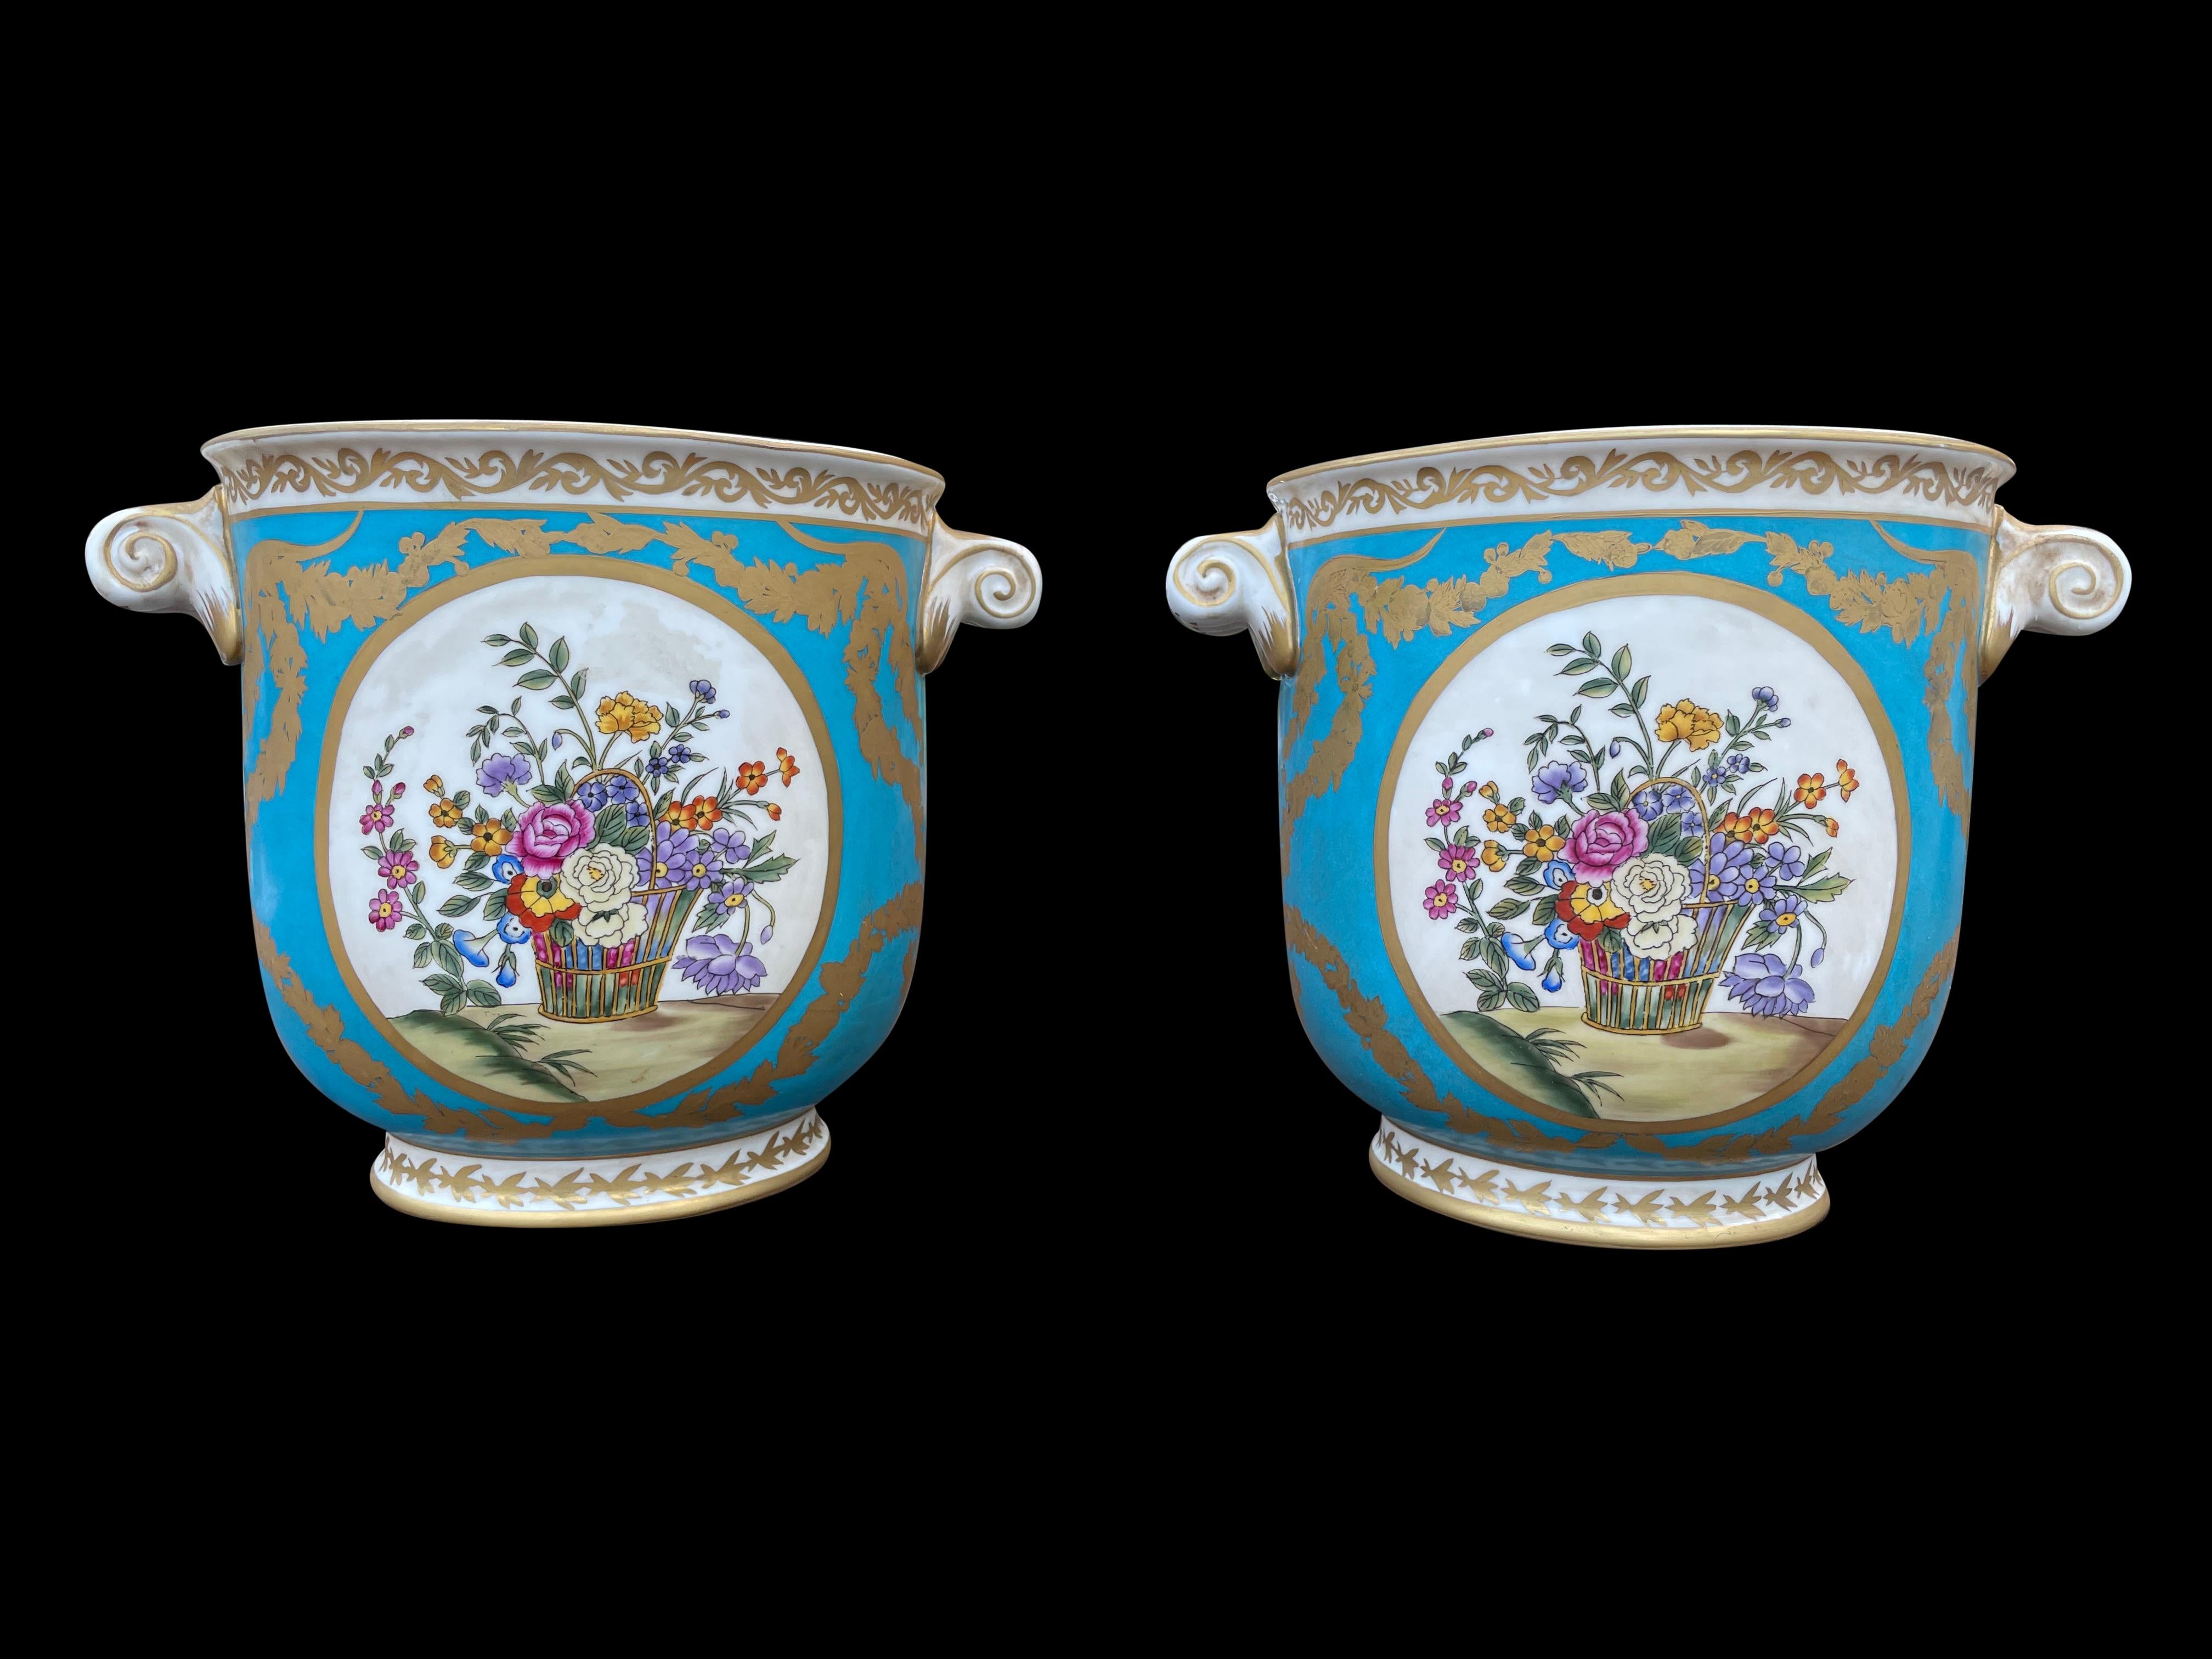 A stunning pair Meissen pair of cachepots planters flower blossoms, 20th century.

Meissen gorgeous pair of cachepots / planters stunningly decorated with flower blossoms.
The blue porcelain surface is ornamented with finest bundle of scattered